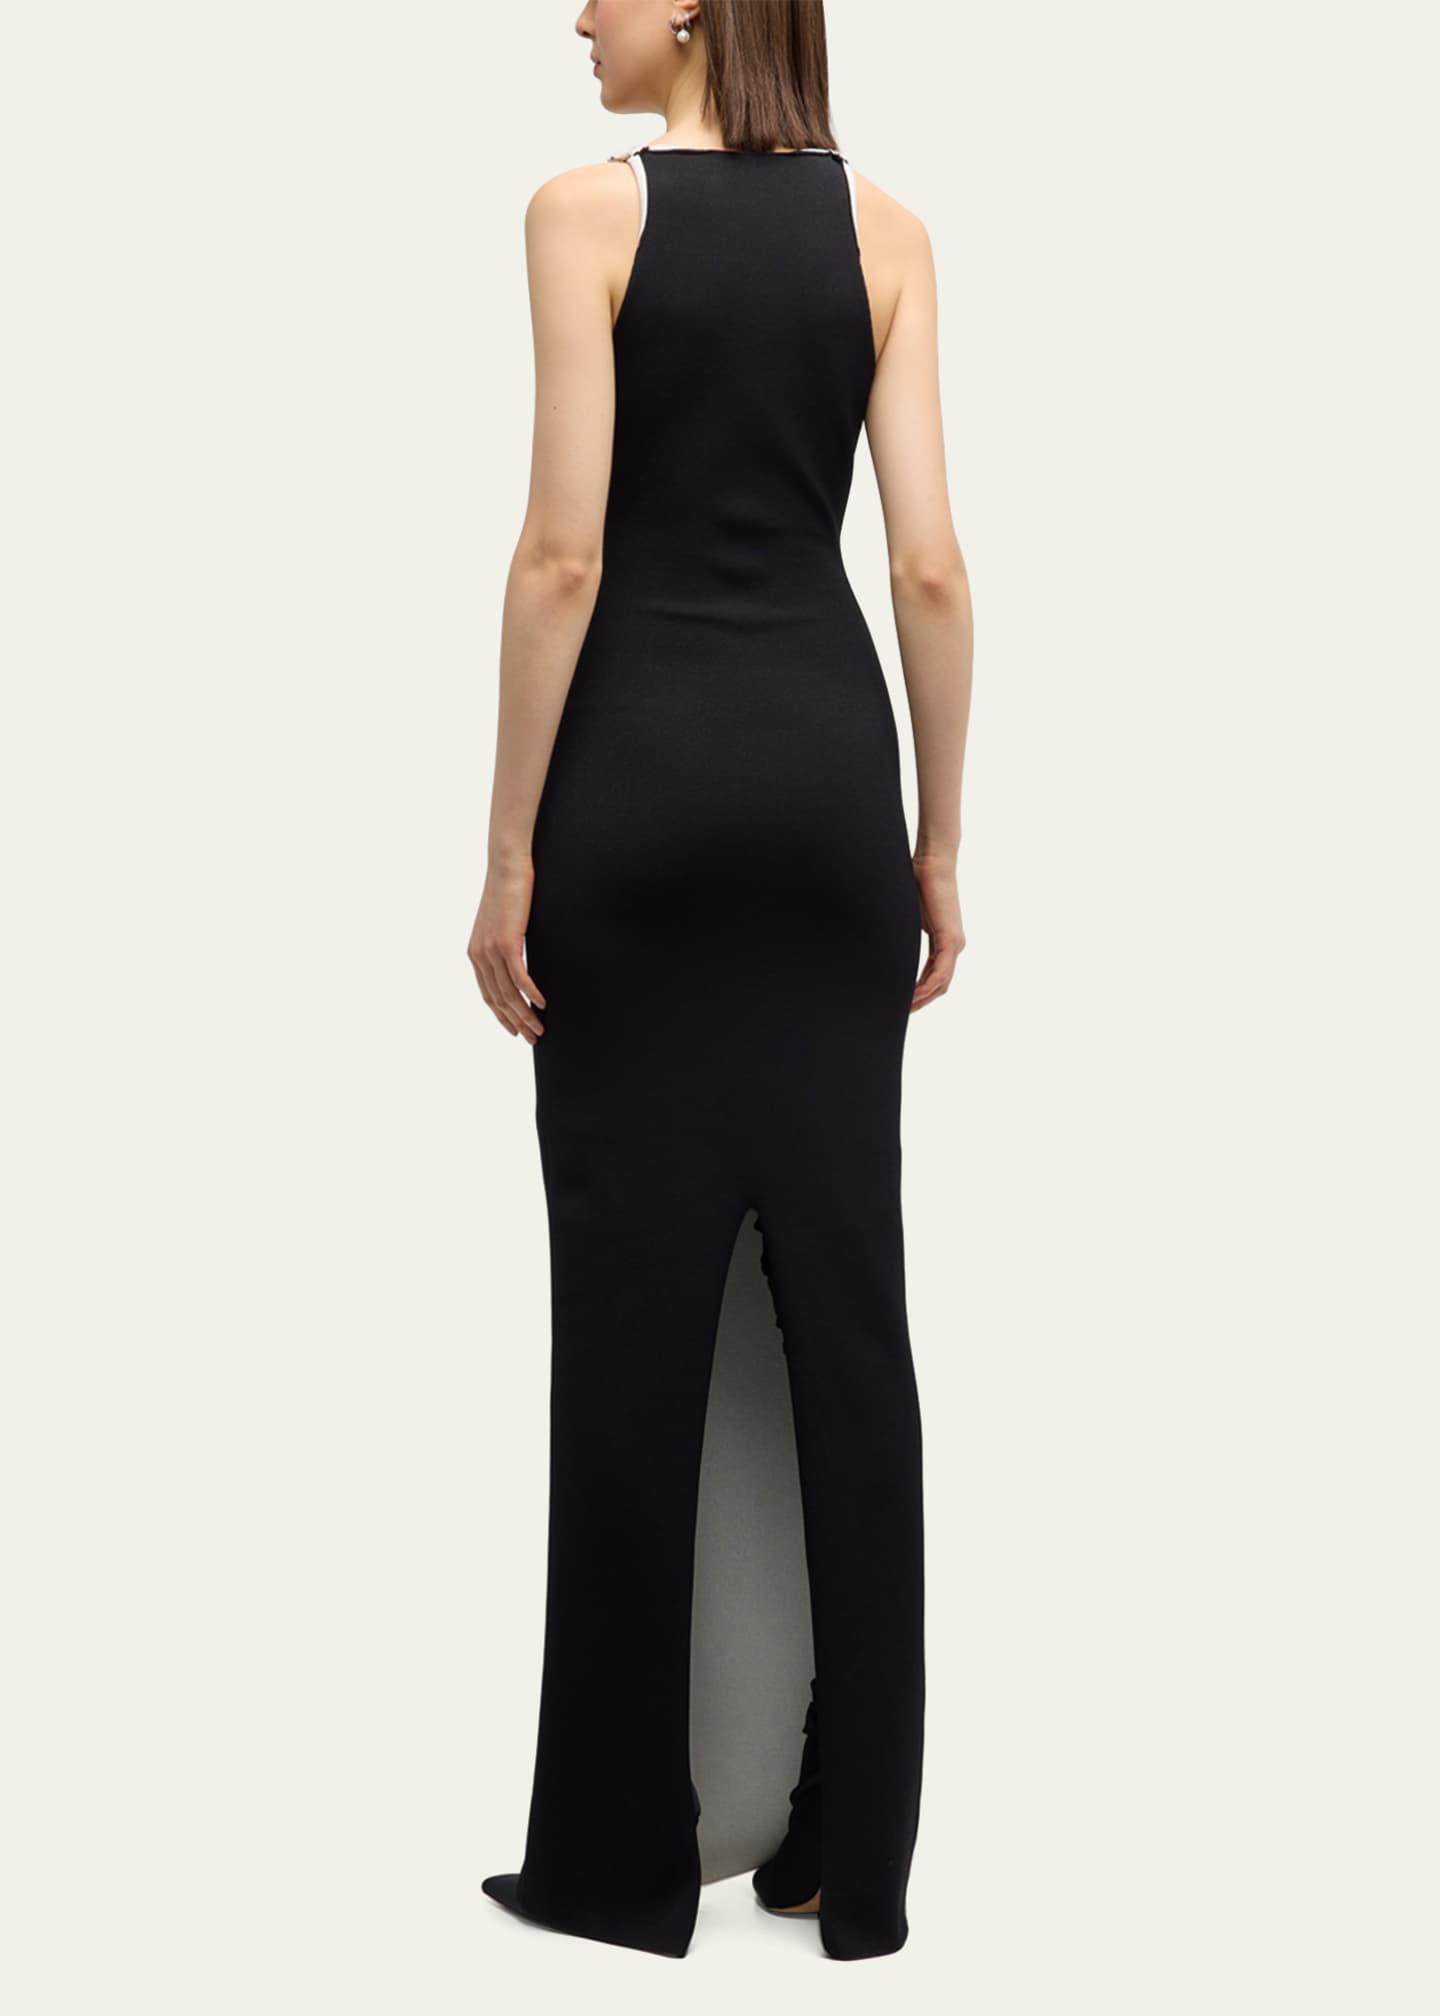 Brandon Maxwell Reversible Scoop-Neck Knit Dress with Hardware Detail ...